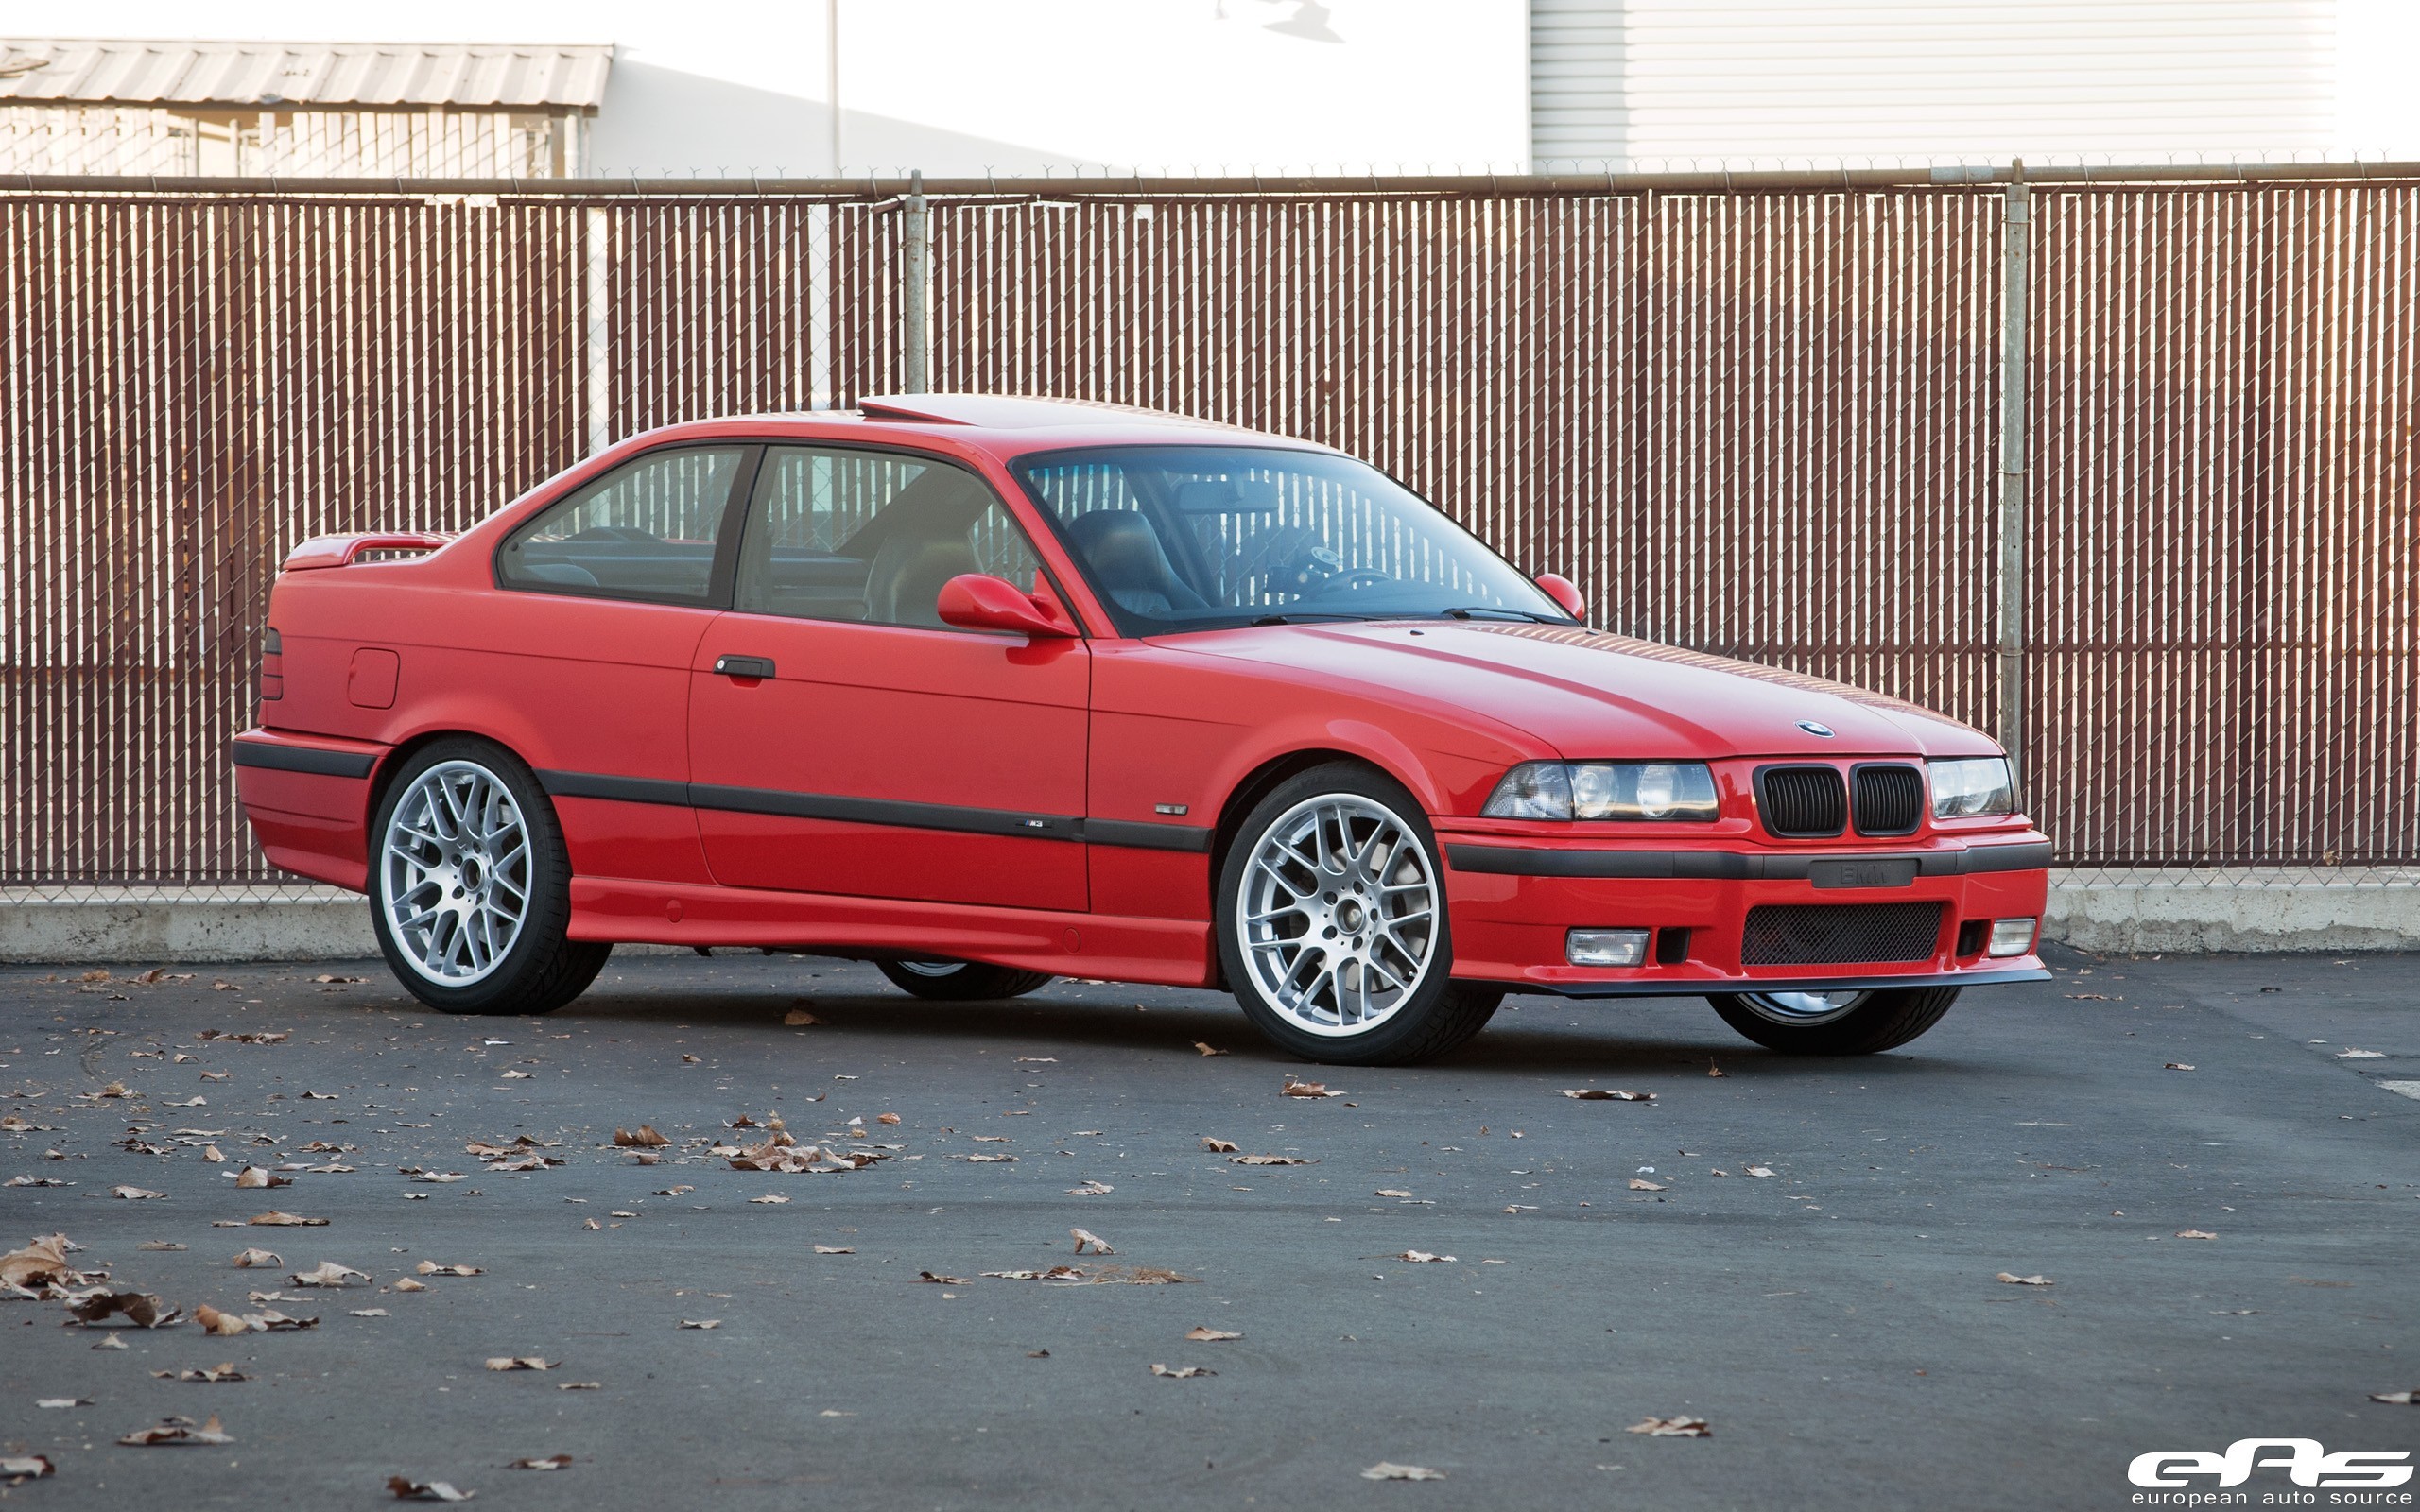 2560x1600 BMW, BMW E36, Car, Red Cars Wallpapers HD / Desktop and Mobile Backgrounds